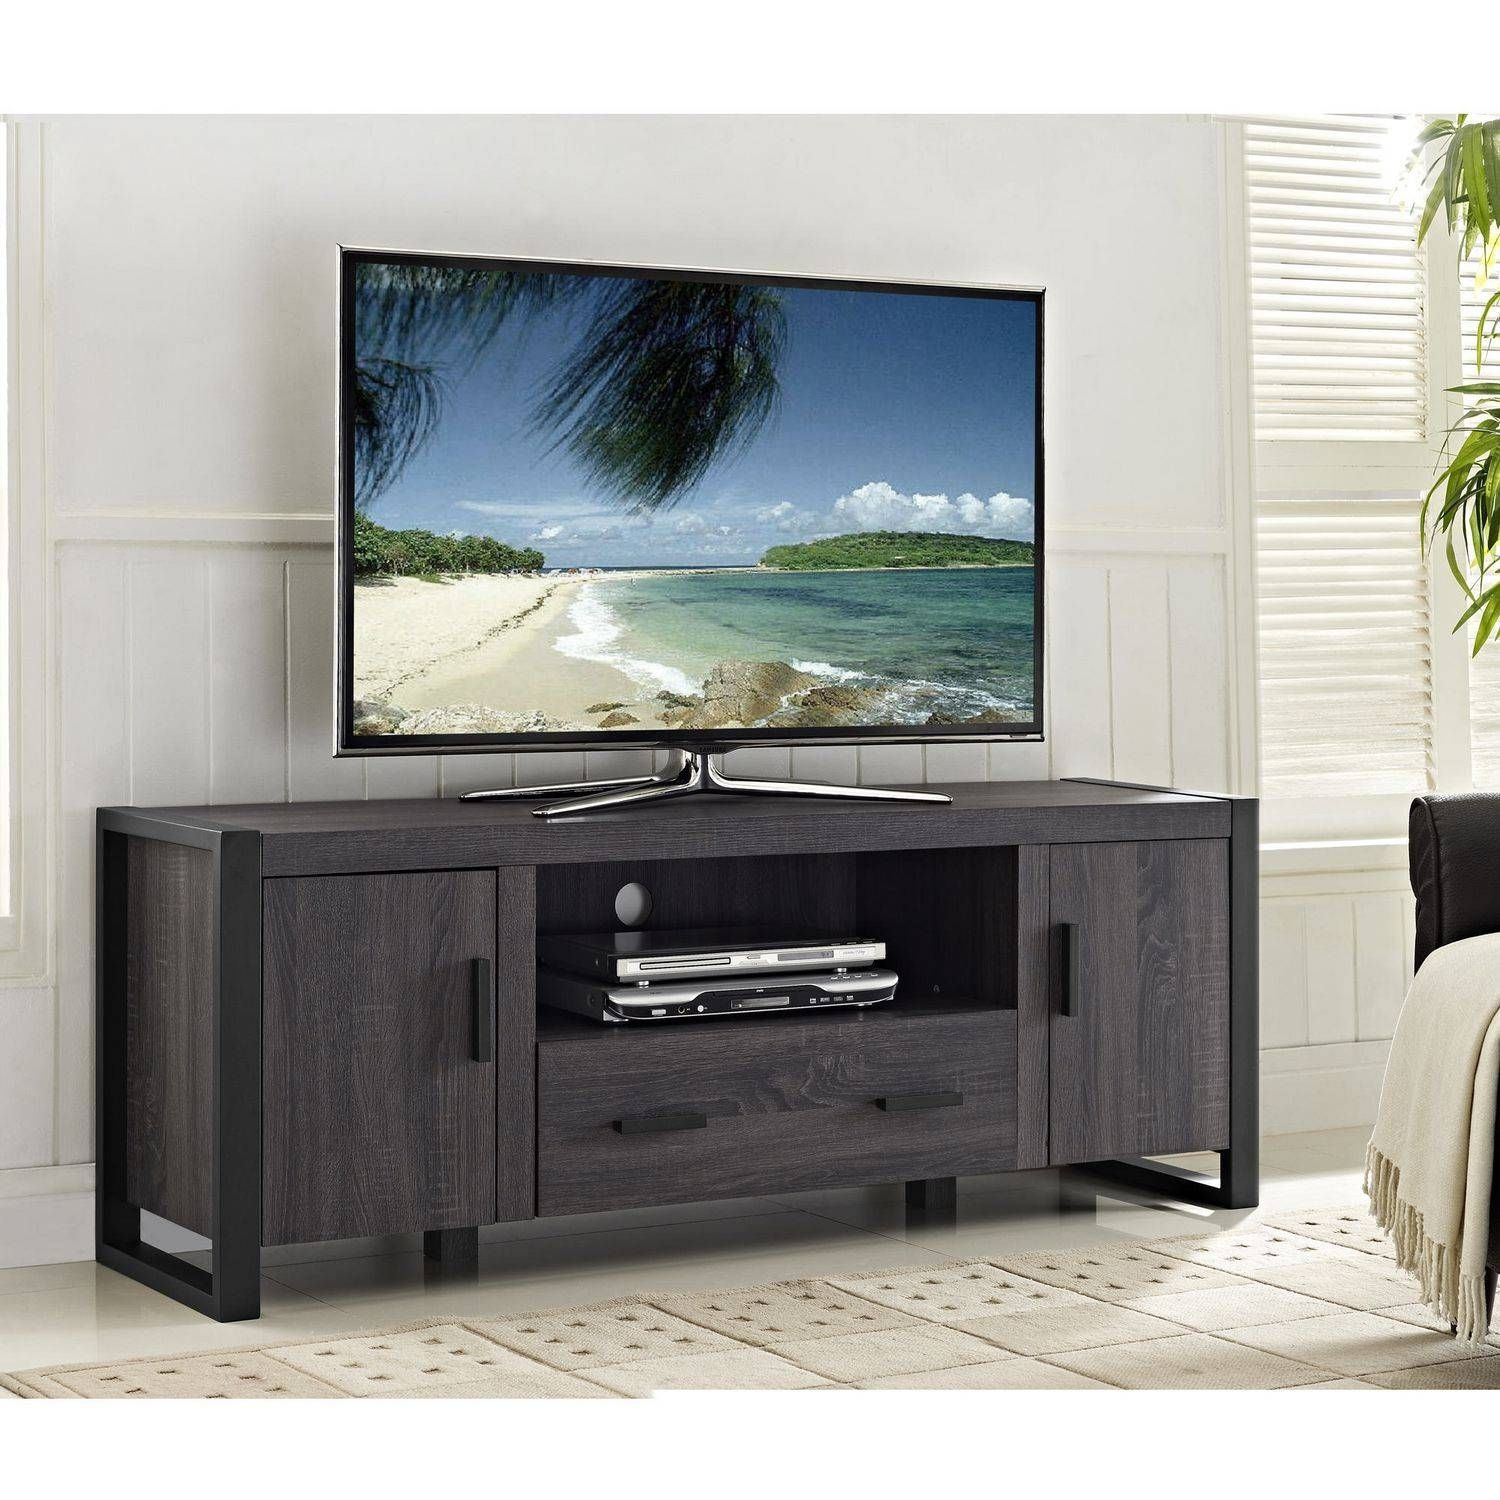 We Furniture 60" Grey Wood Tv Stand Console | Walmart Canada In Grey Tv Stands (Photo 1 of 15)